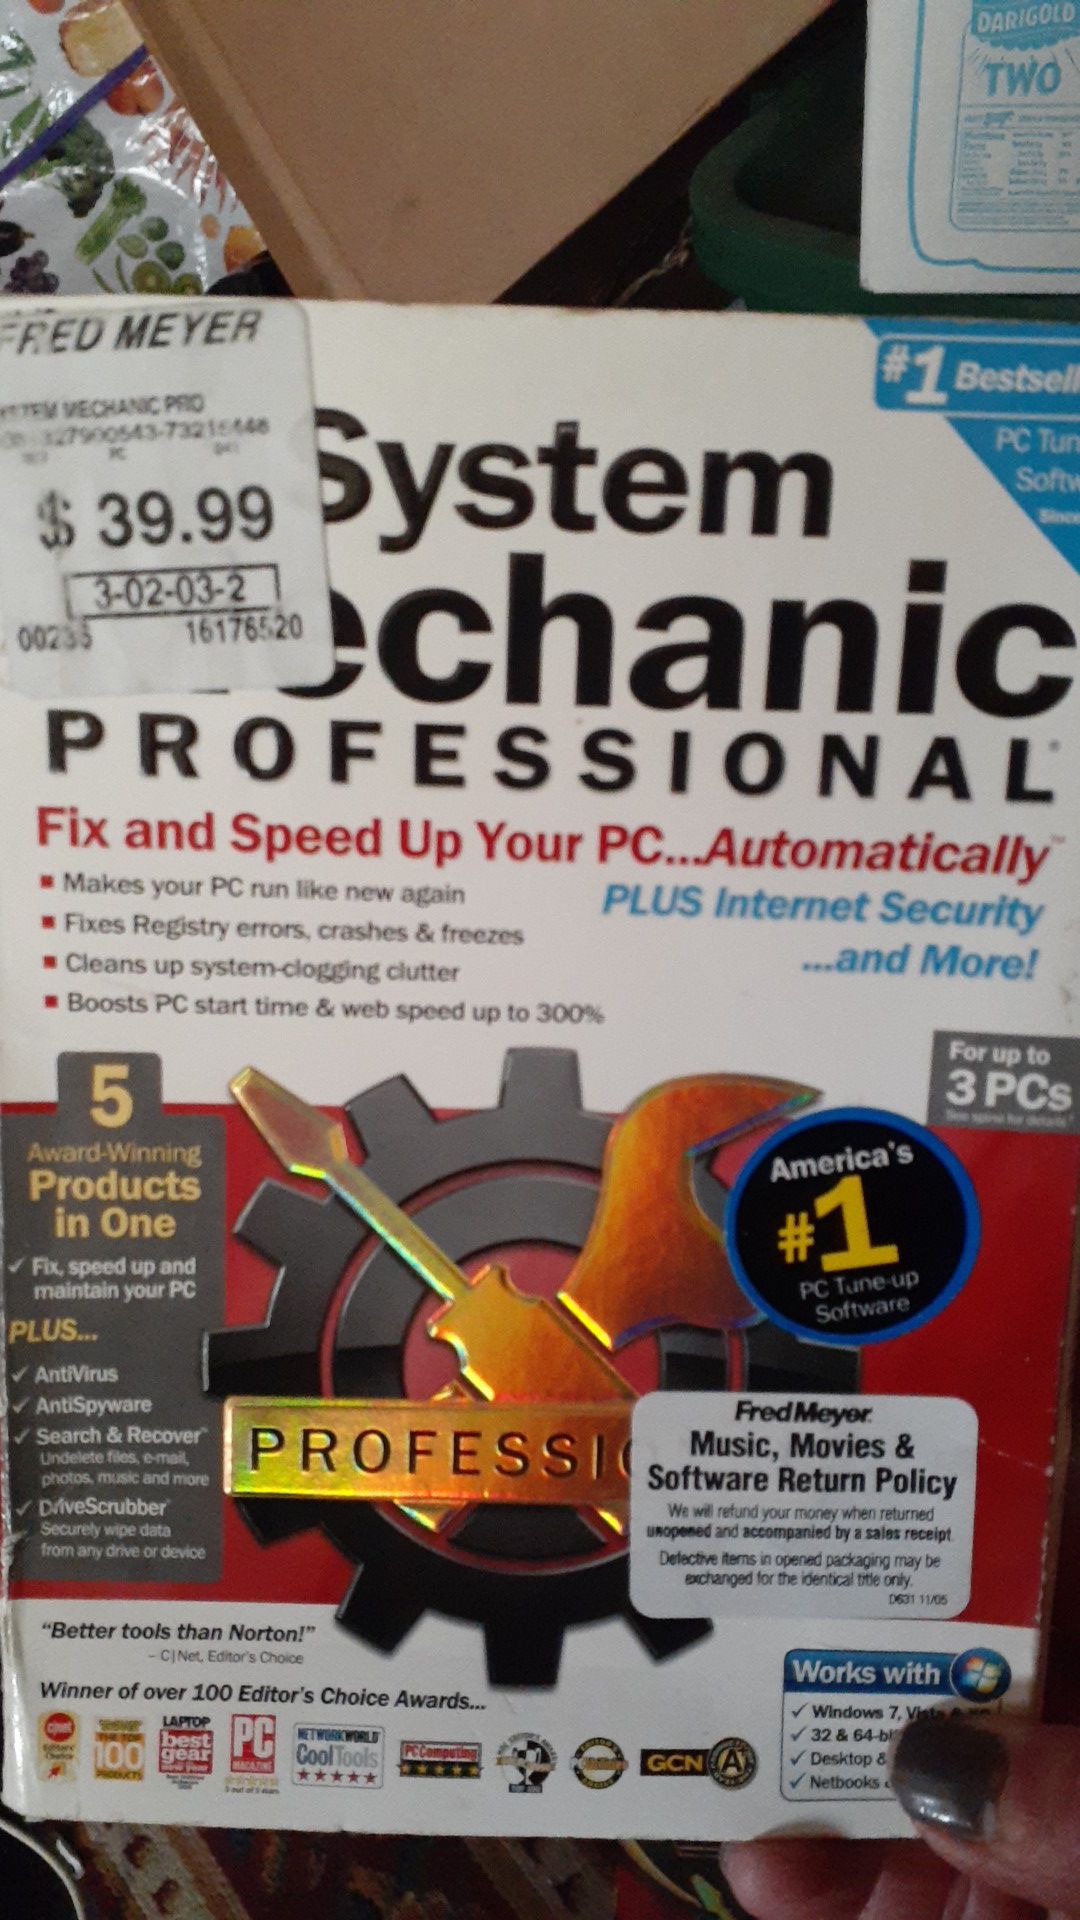 System mechanic professional computer software